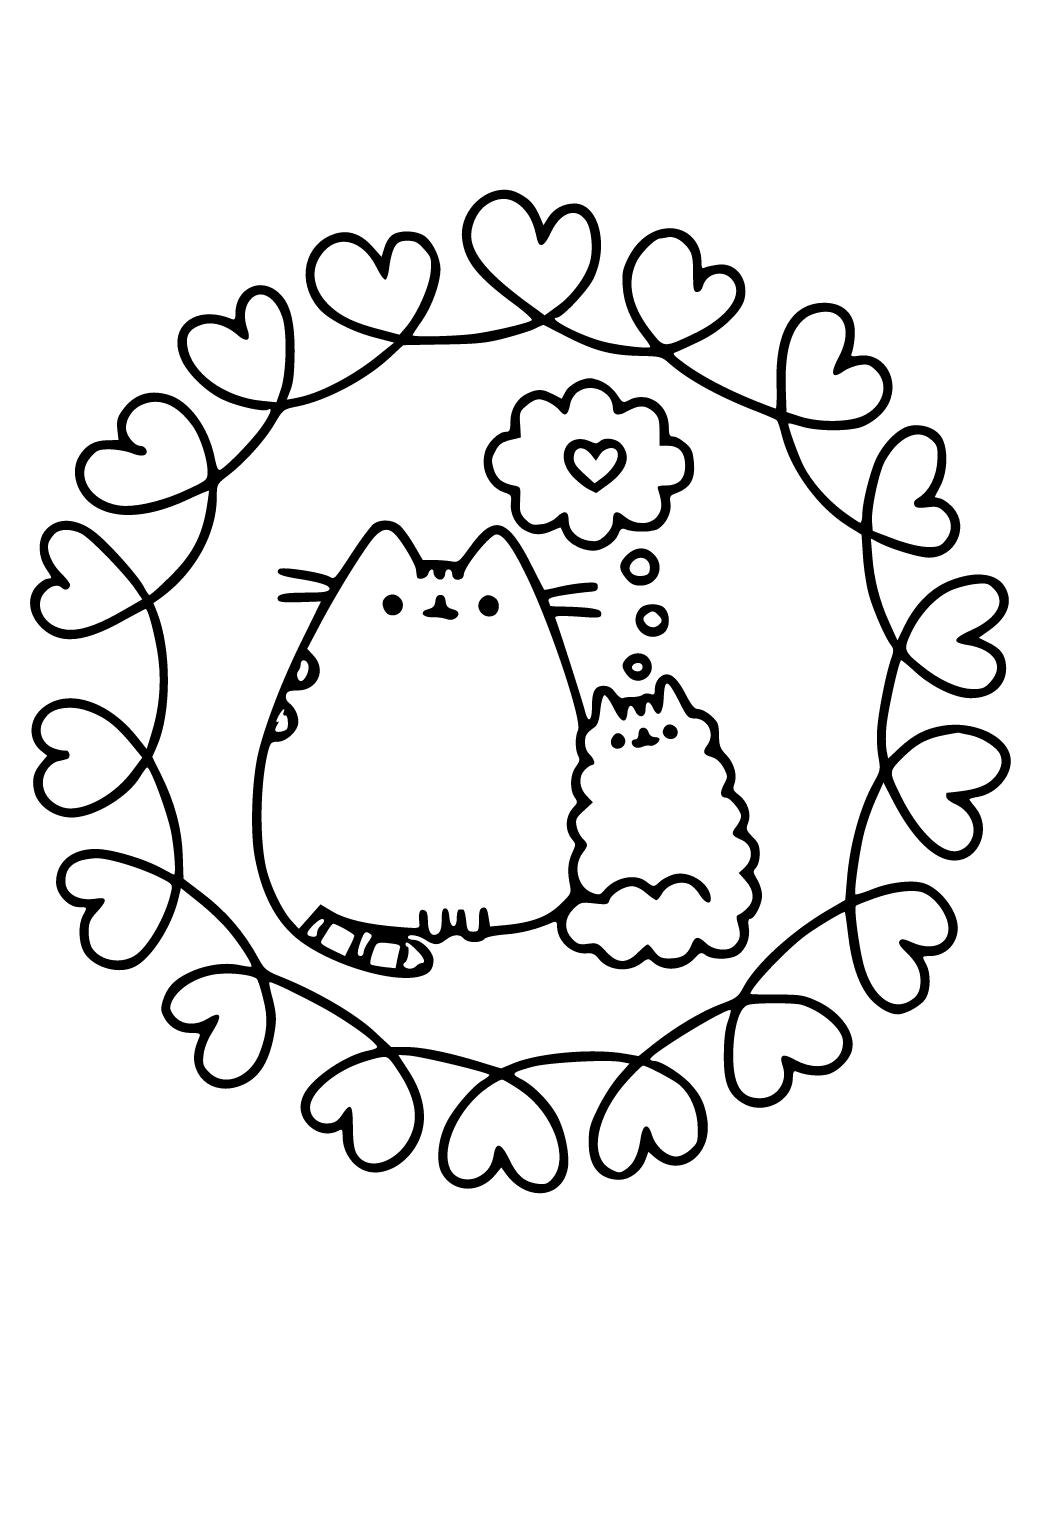 Free printable pusheen love coloring page sheet and picture for adults and kids girls and boys